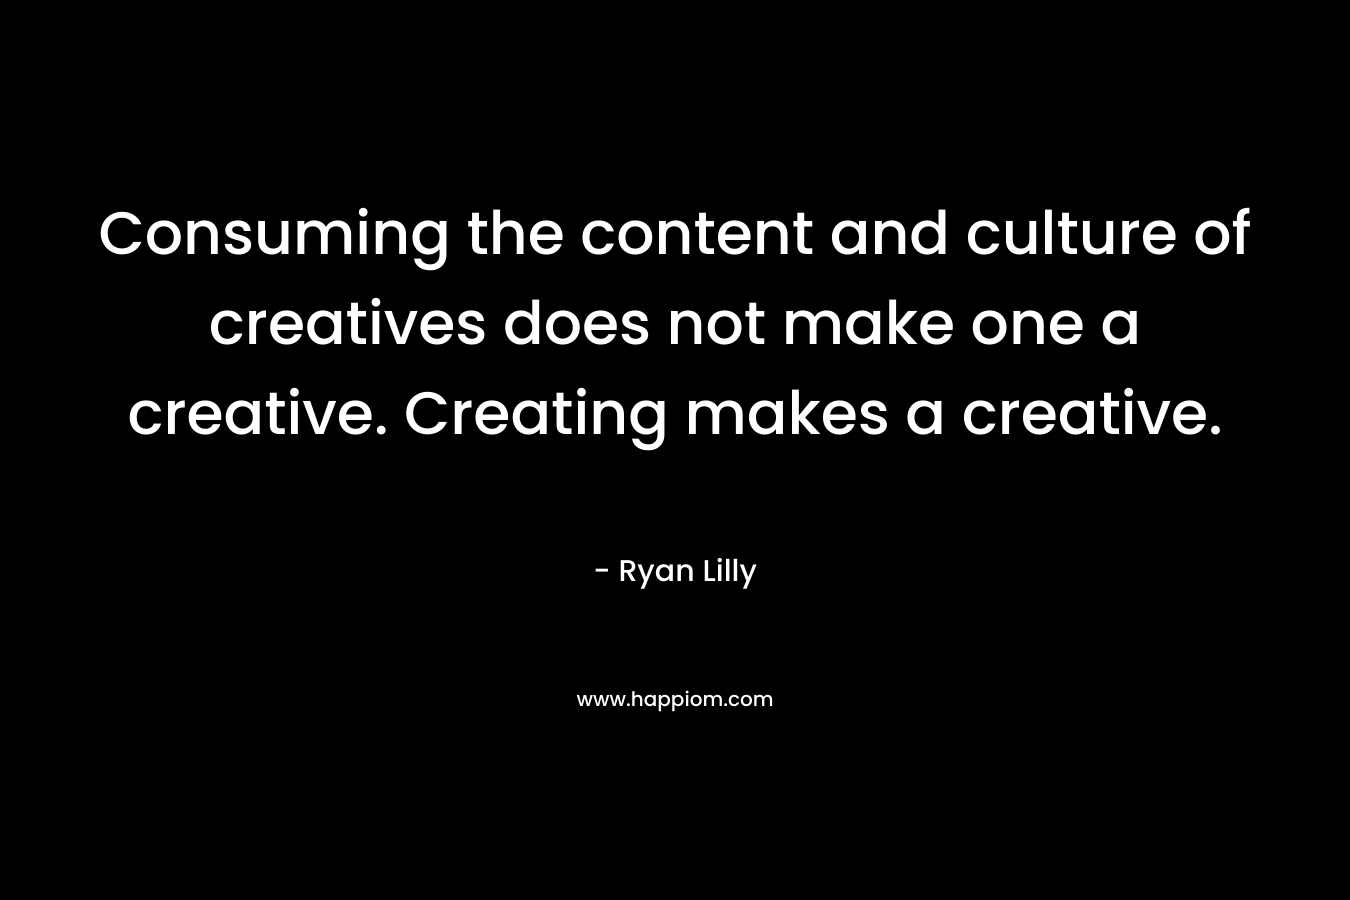 Consuming the content and culture of creatives does not make one a creative. Creating makes a creative. – Ryan Lilly